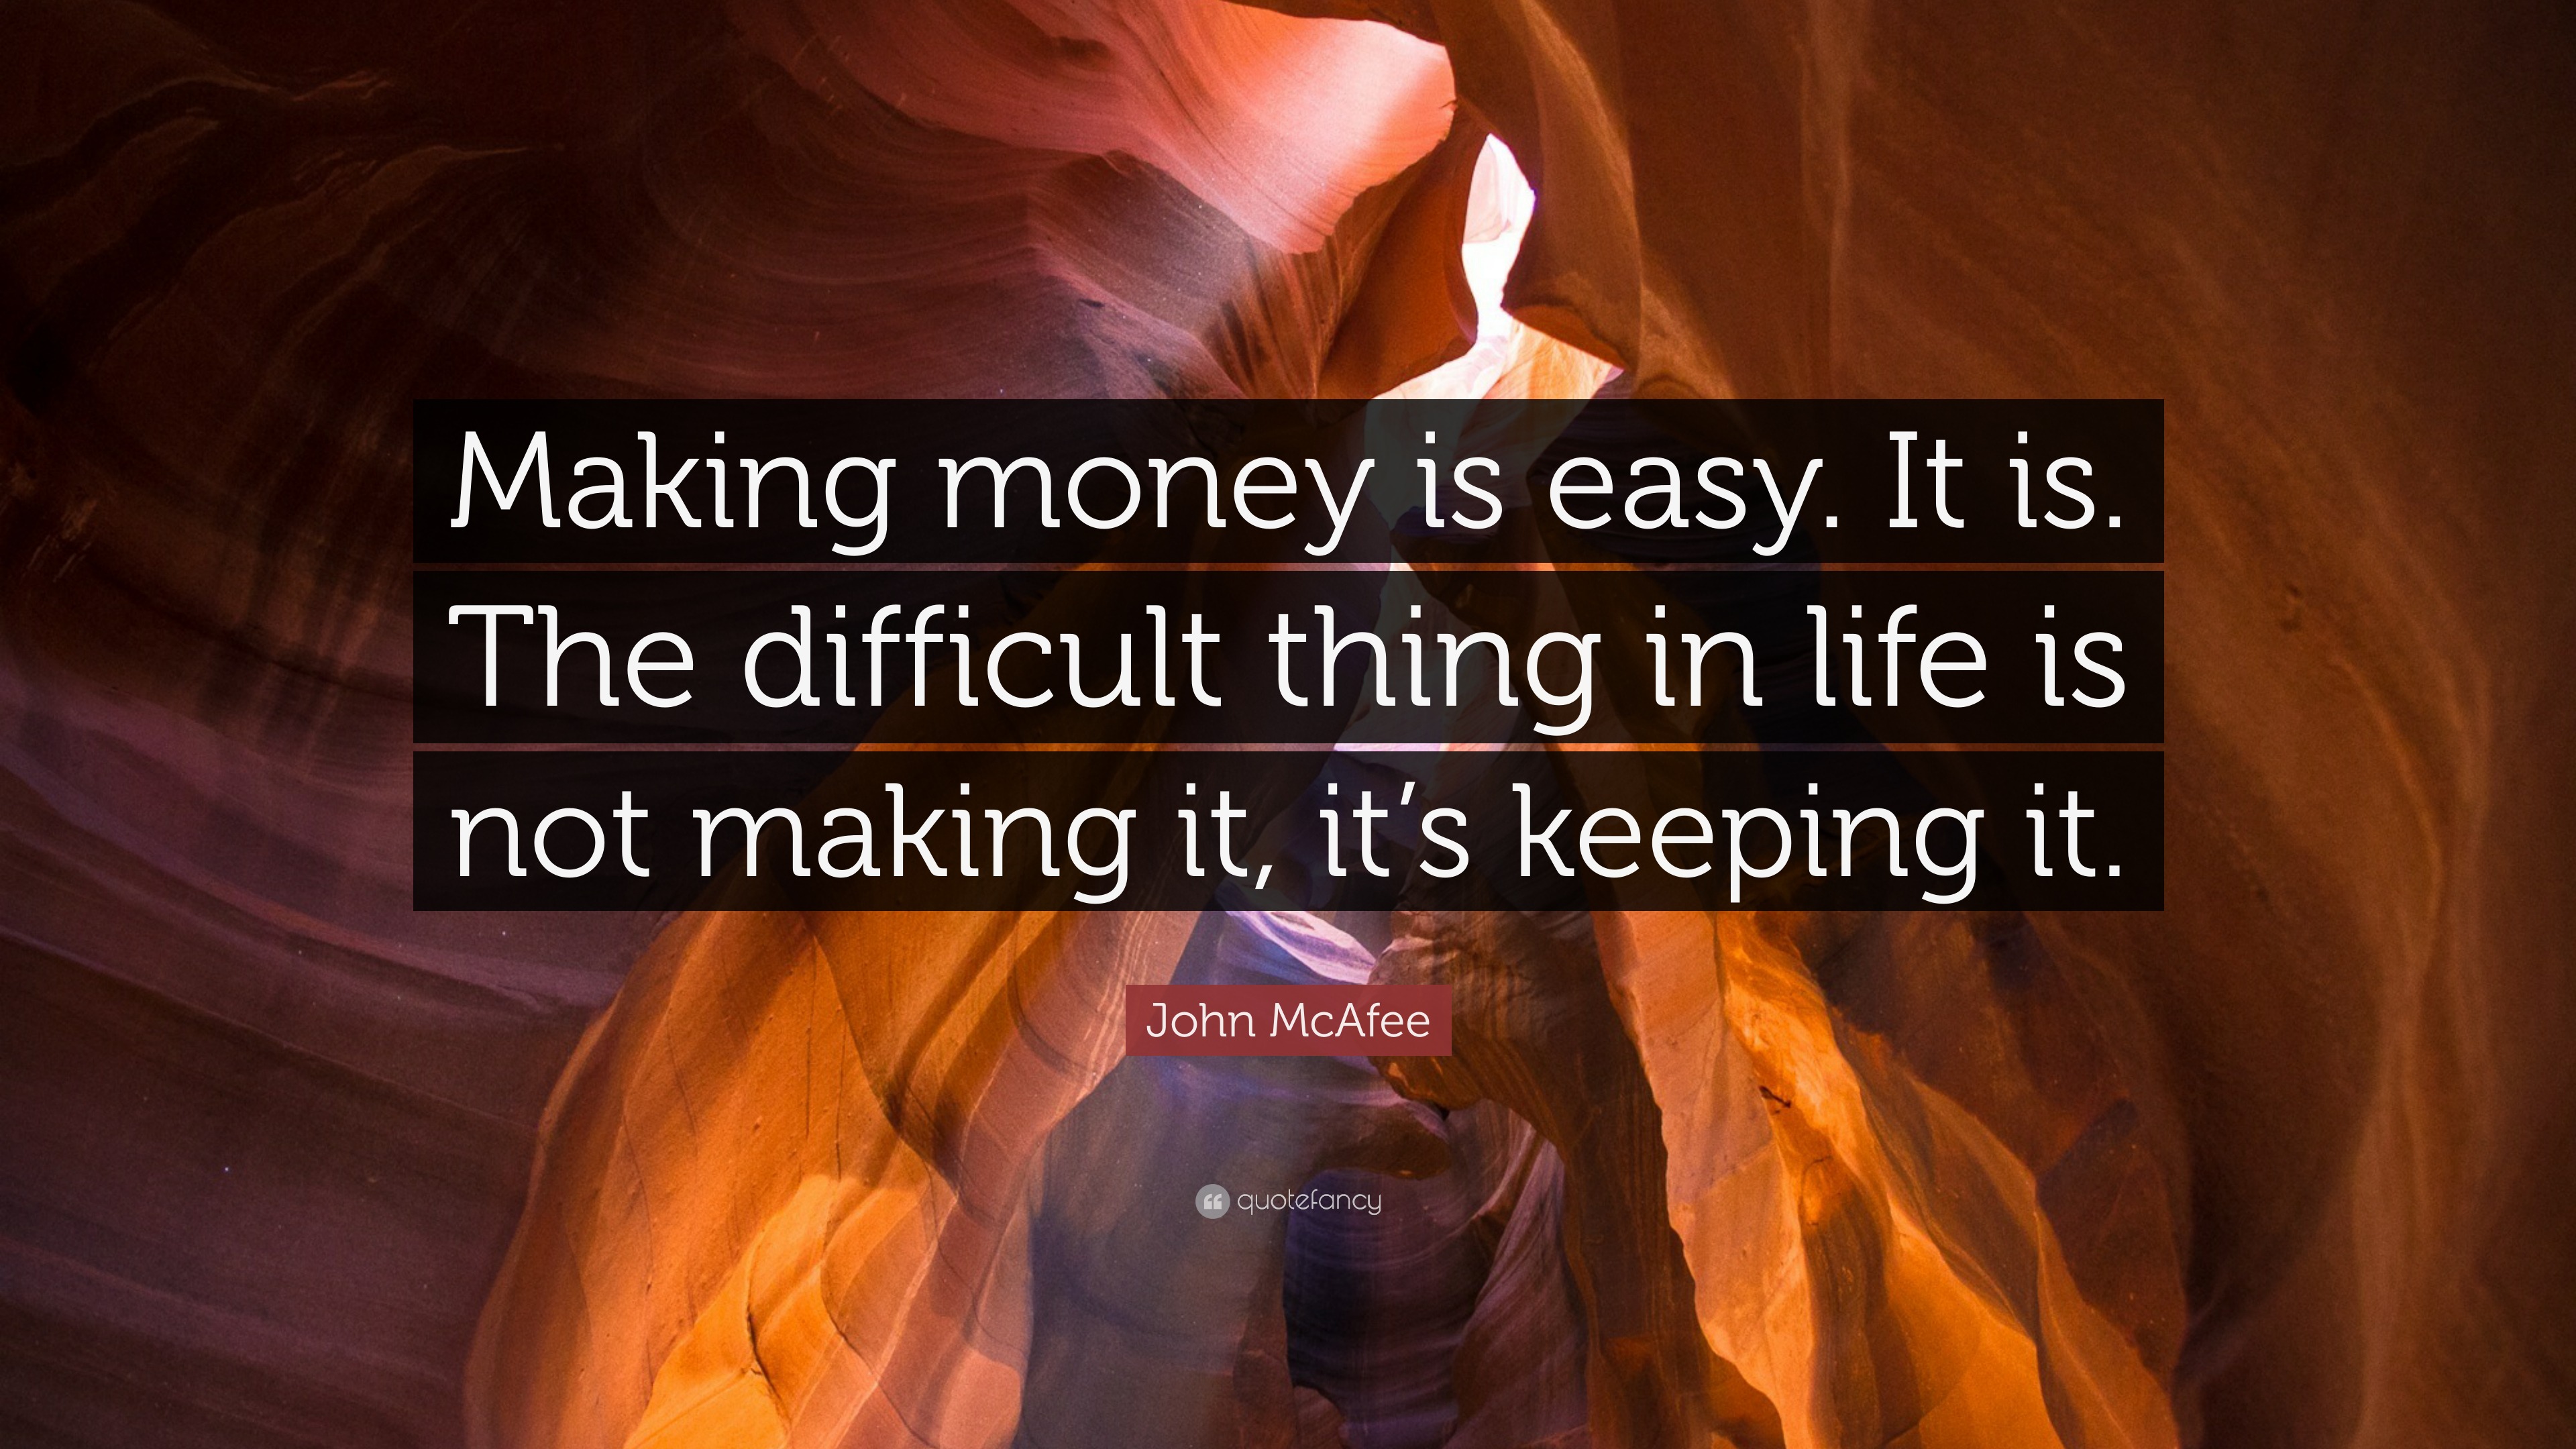 John McAfee Quote: “Making money is easy. It is. The difficult thing in